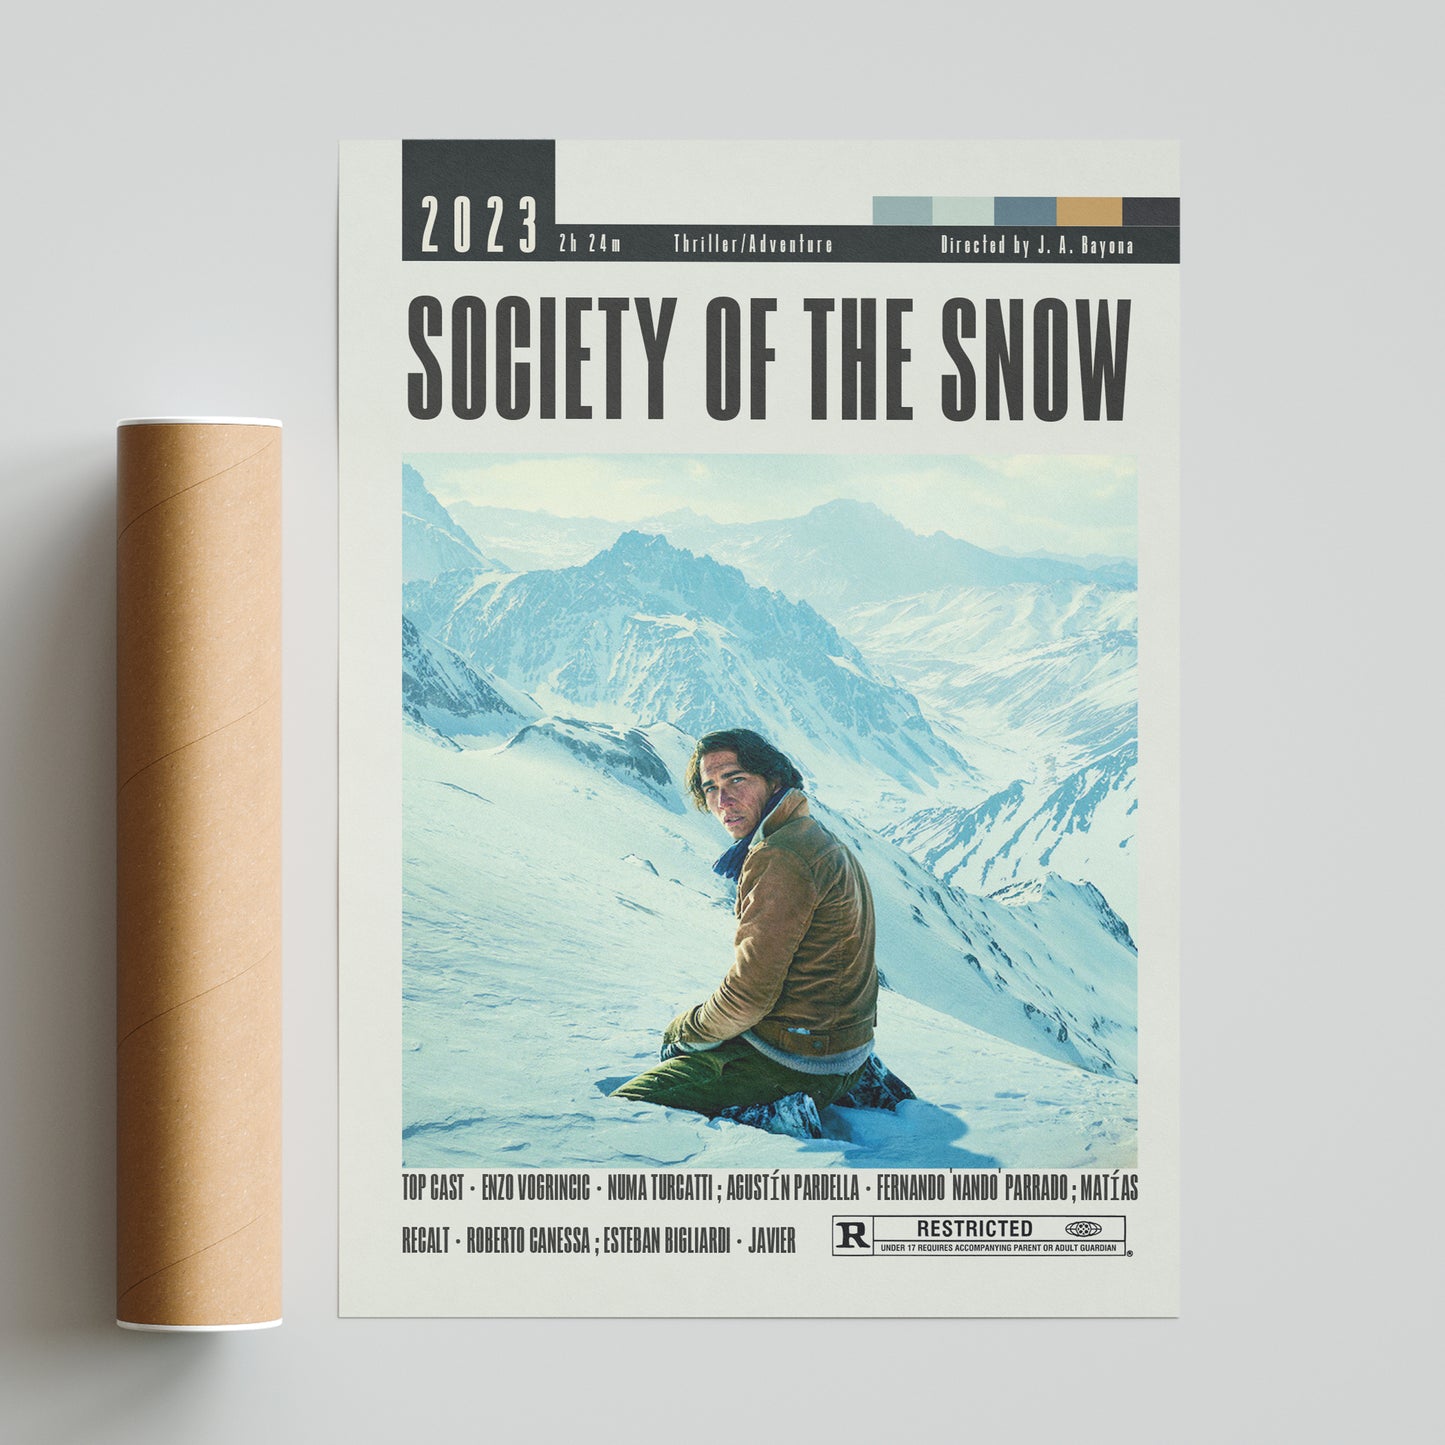 Introducing the Society of the Snow Poster, featuring 98 iconic movie posters from J.A.Bayona's films. Customizable and minimalist in design, this wall art print adds a vintage touch to your decor. Choose from A6 to A3 sizes and showcase the best movies of all time. Includes top cast, duration, director, and memorable scenes.